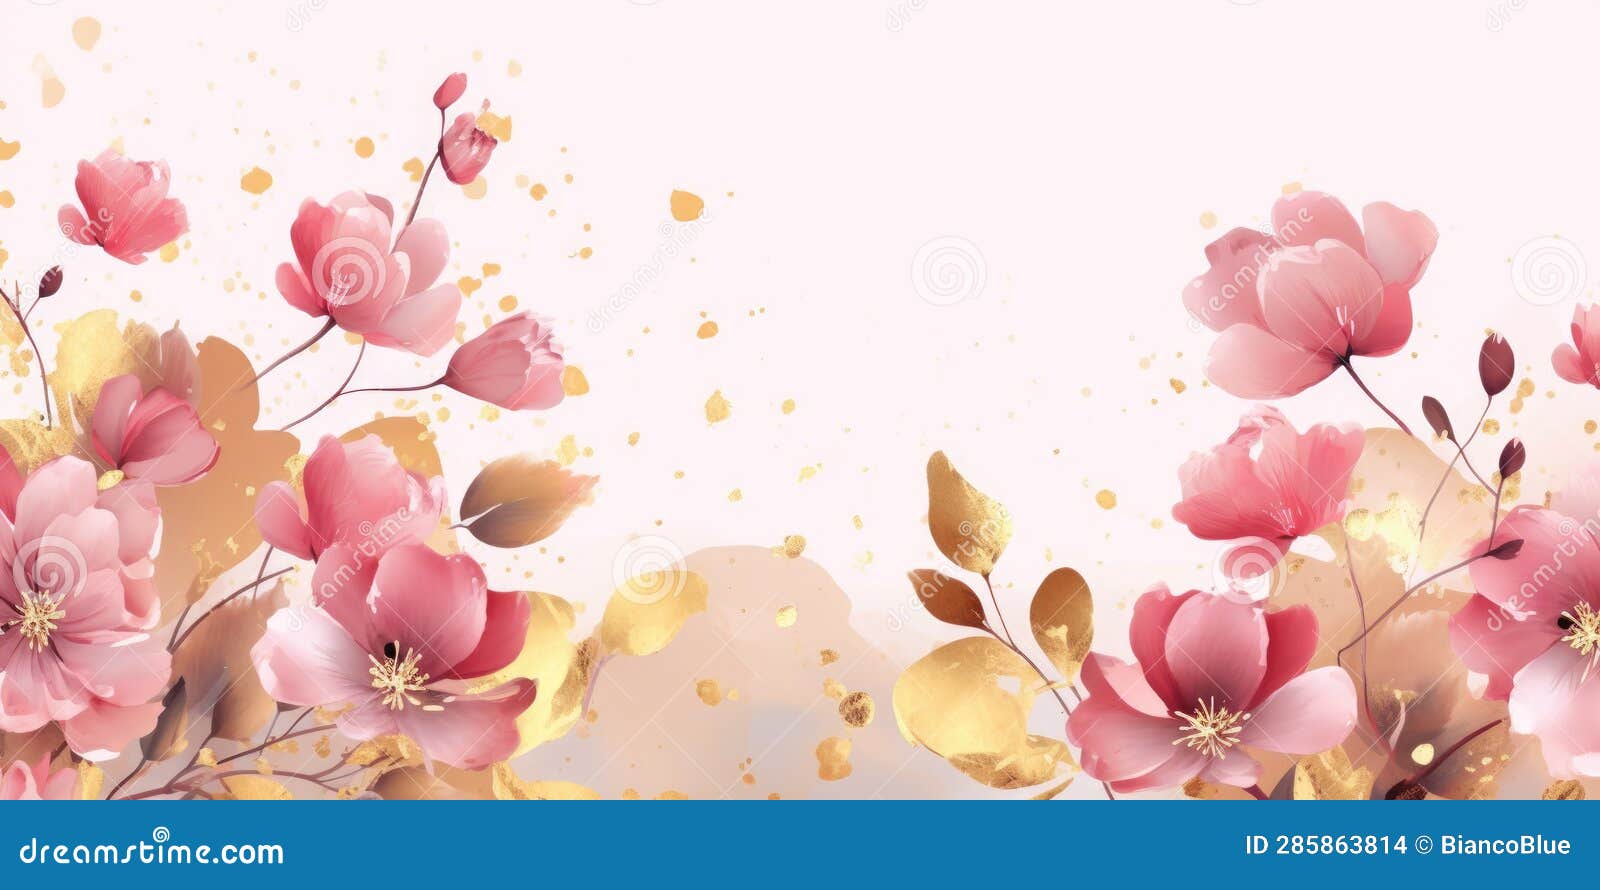 Beautiful Abstract Gold and Pink Watercolor Floral Design Background ...